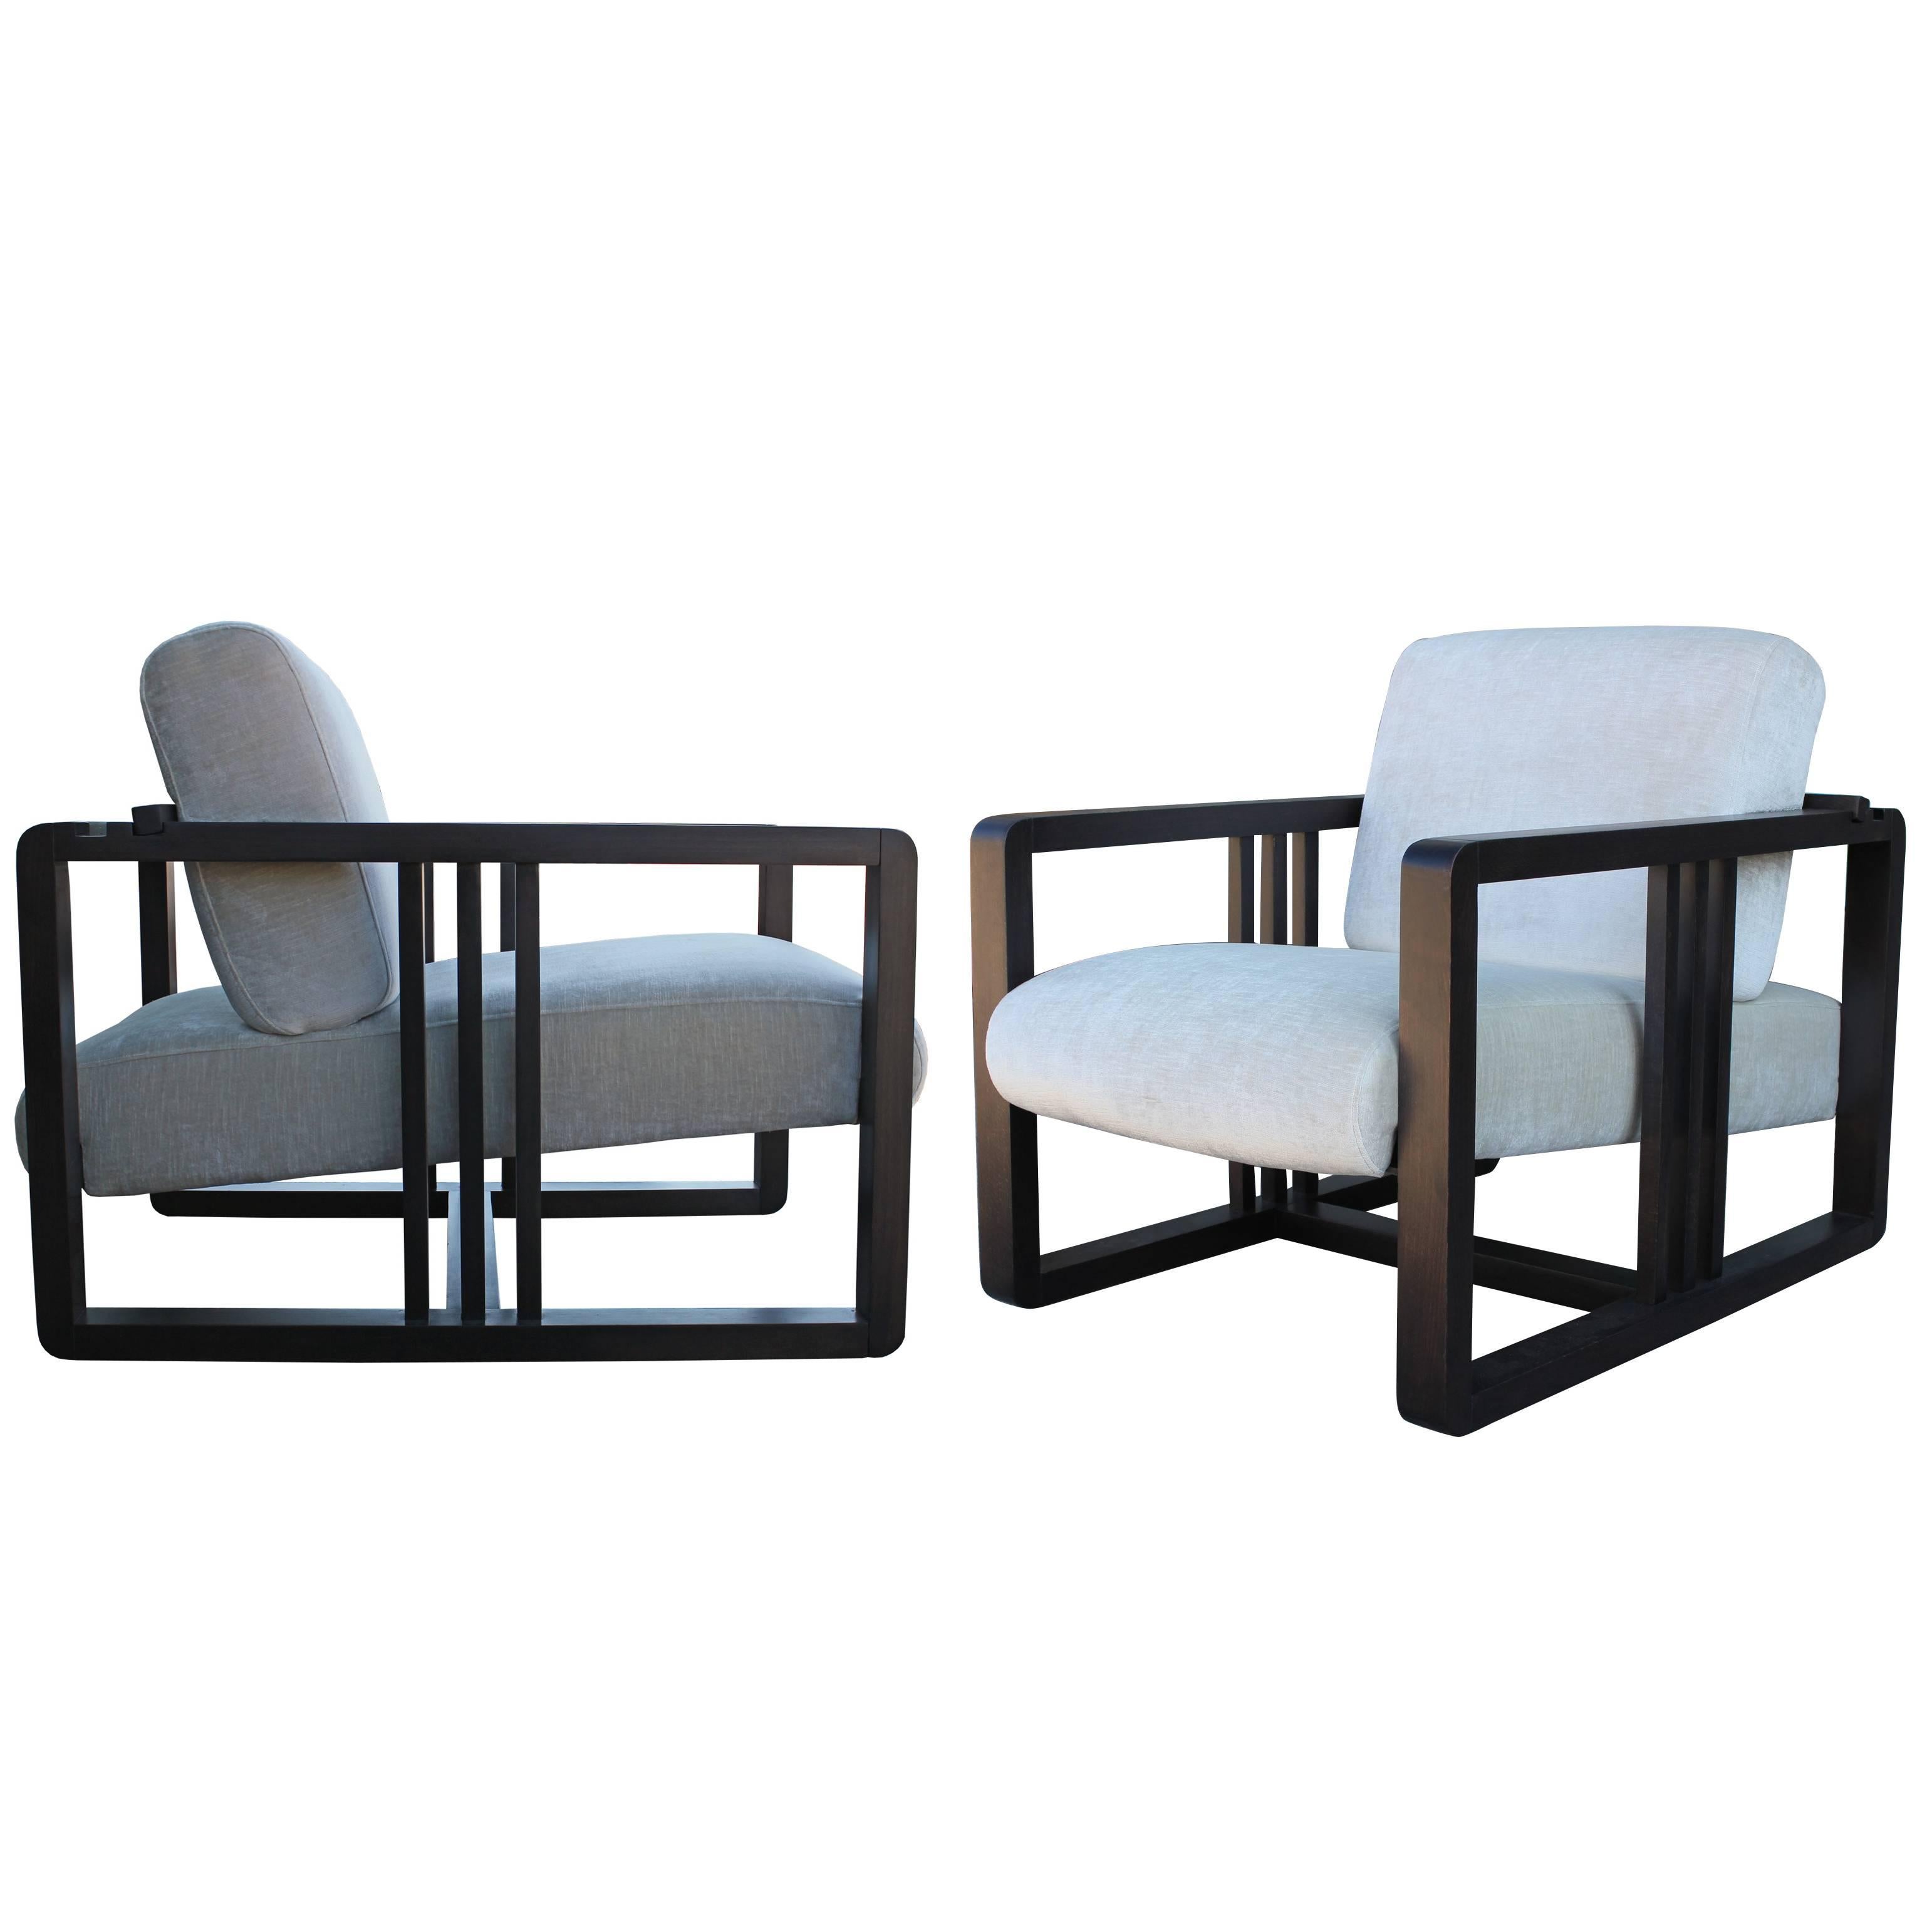 Roche Bobois Frank Lloyd Wright Style Pair of Adjustable Modern Lounge Chairs